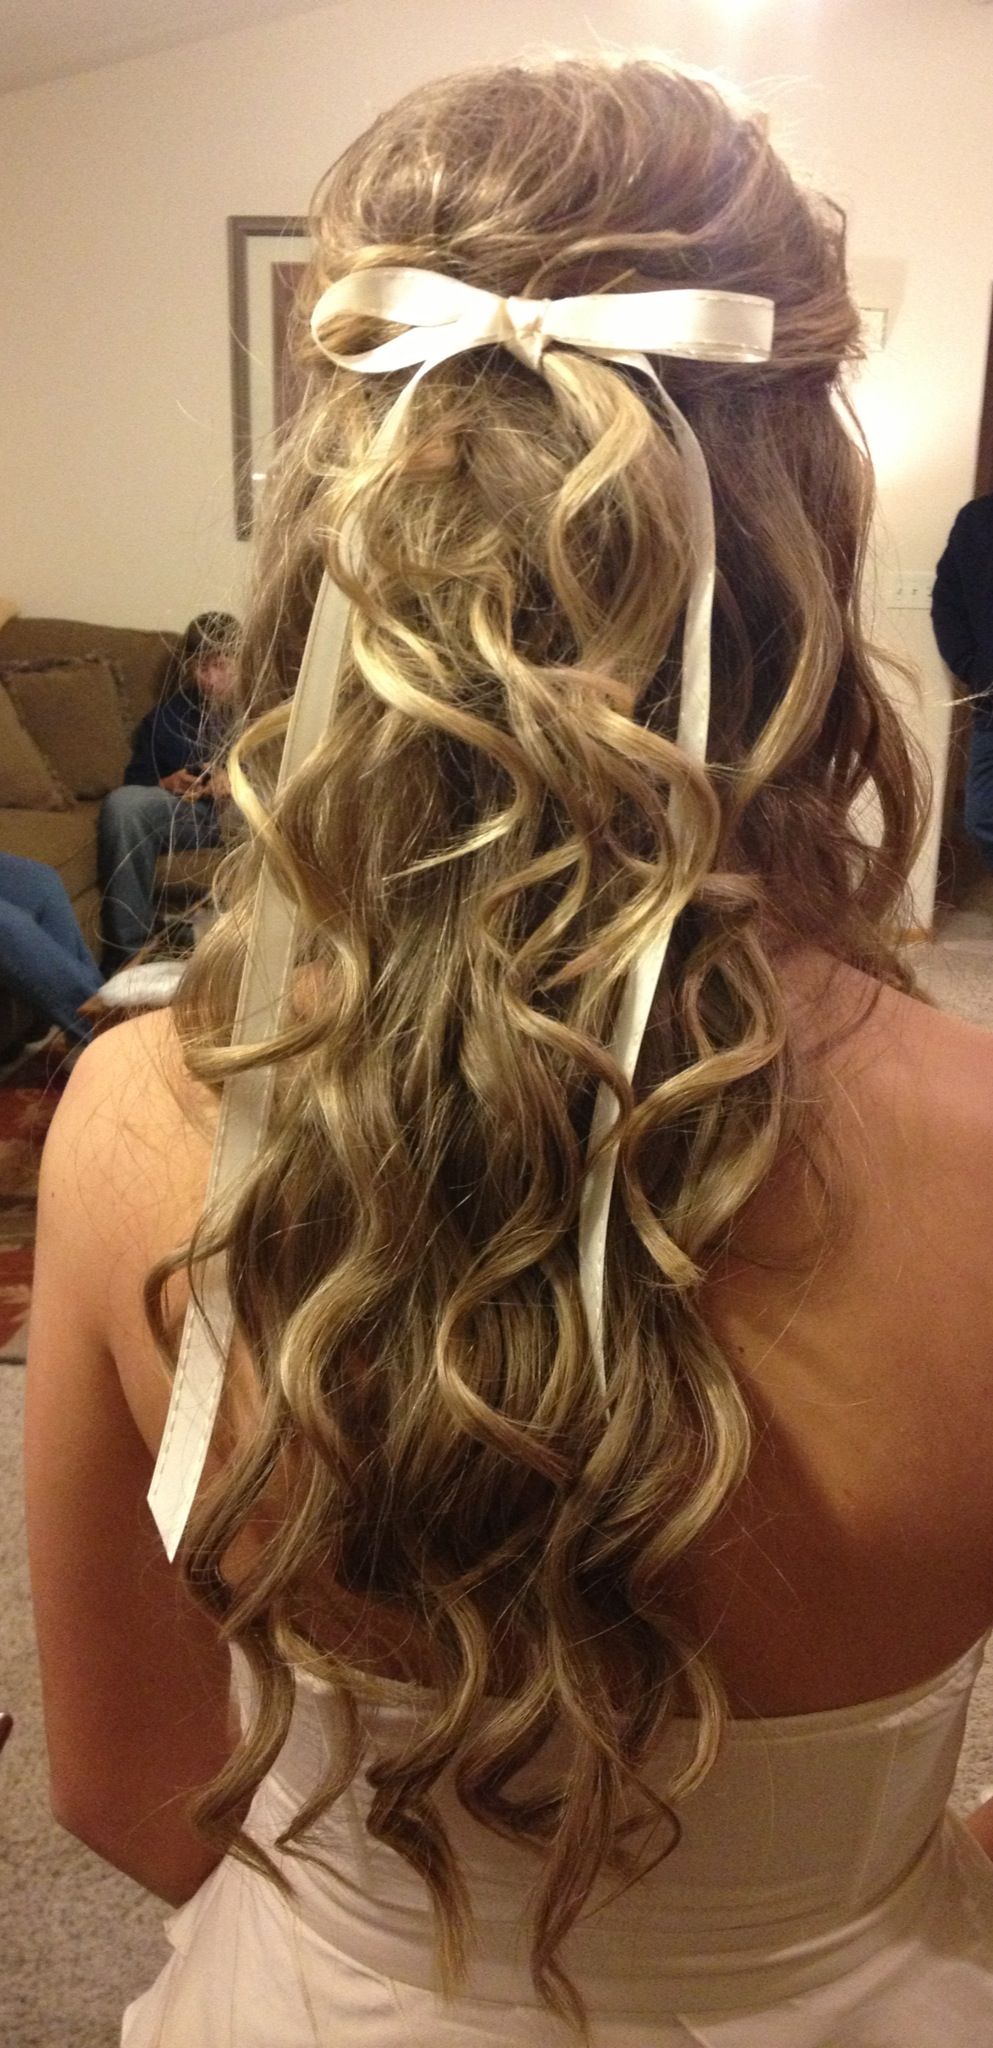 Homecoming hair, LOVEEE the bow super cute! | Beauty | Pinterest ...